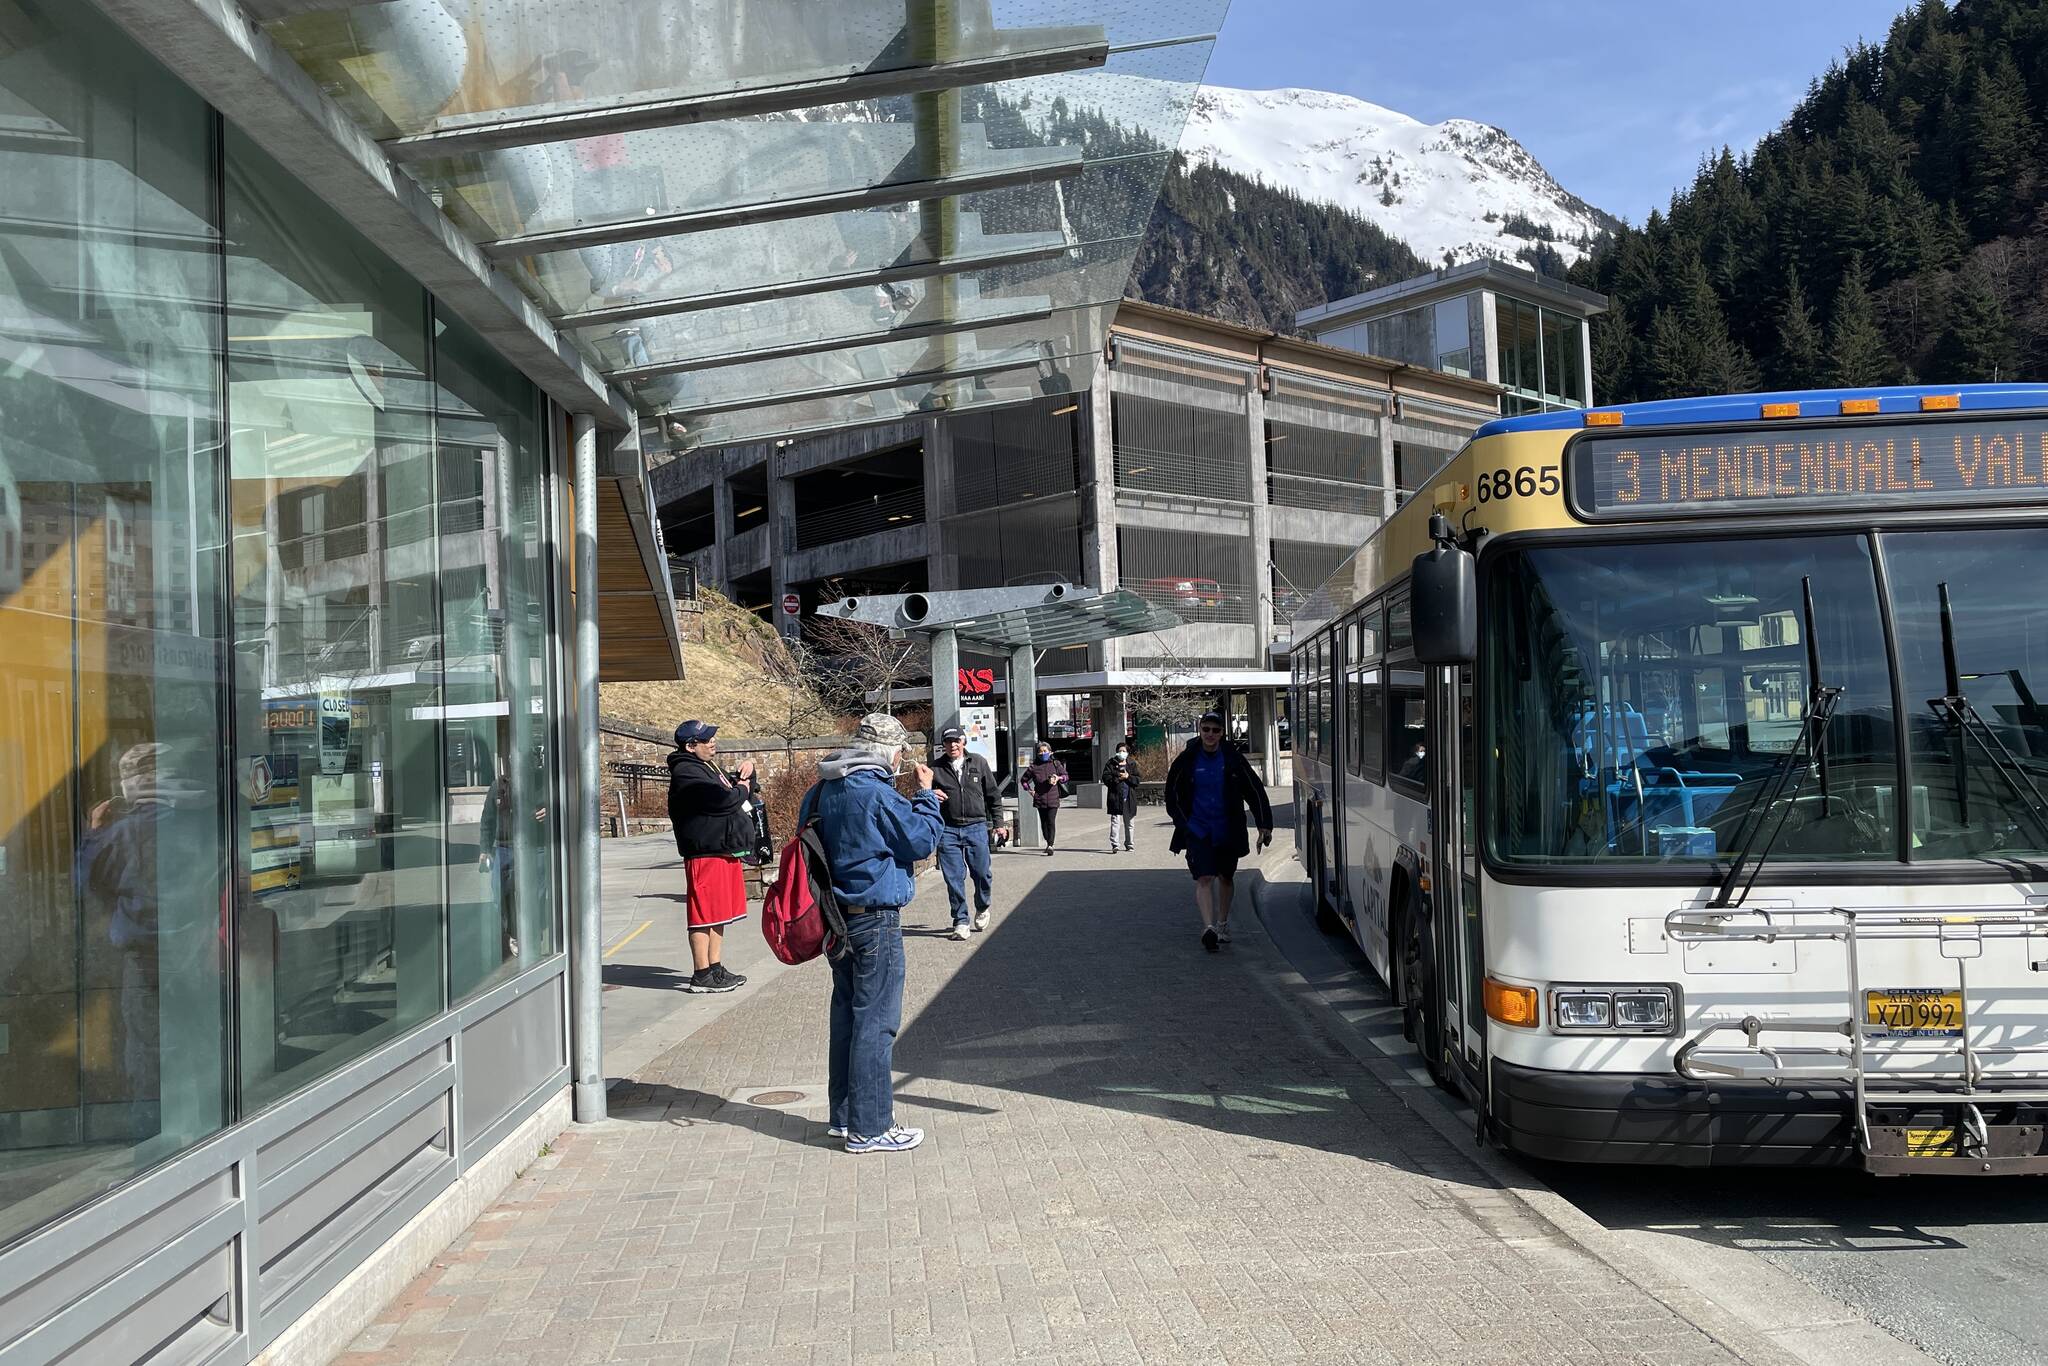 The City and Borough of Juneau announced on April 19 that masks were no longer required on public transit, including Juneau International Airport, Capital Transit and CAPITAL AKcess. (Michael S. Lockett / Juneau Empire)